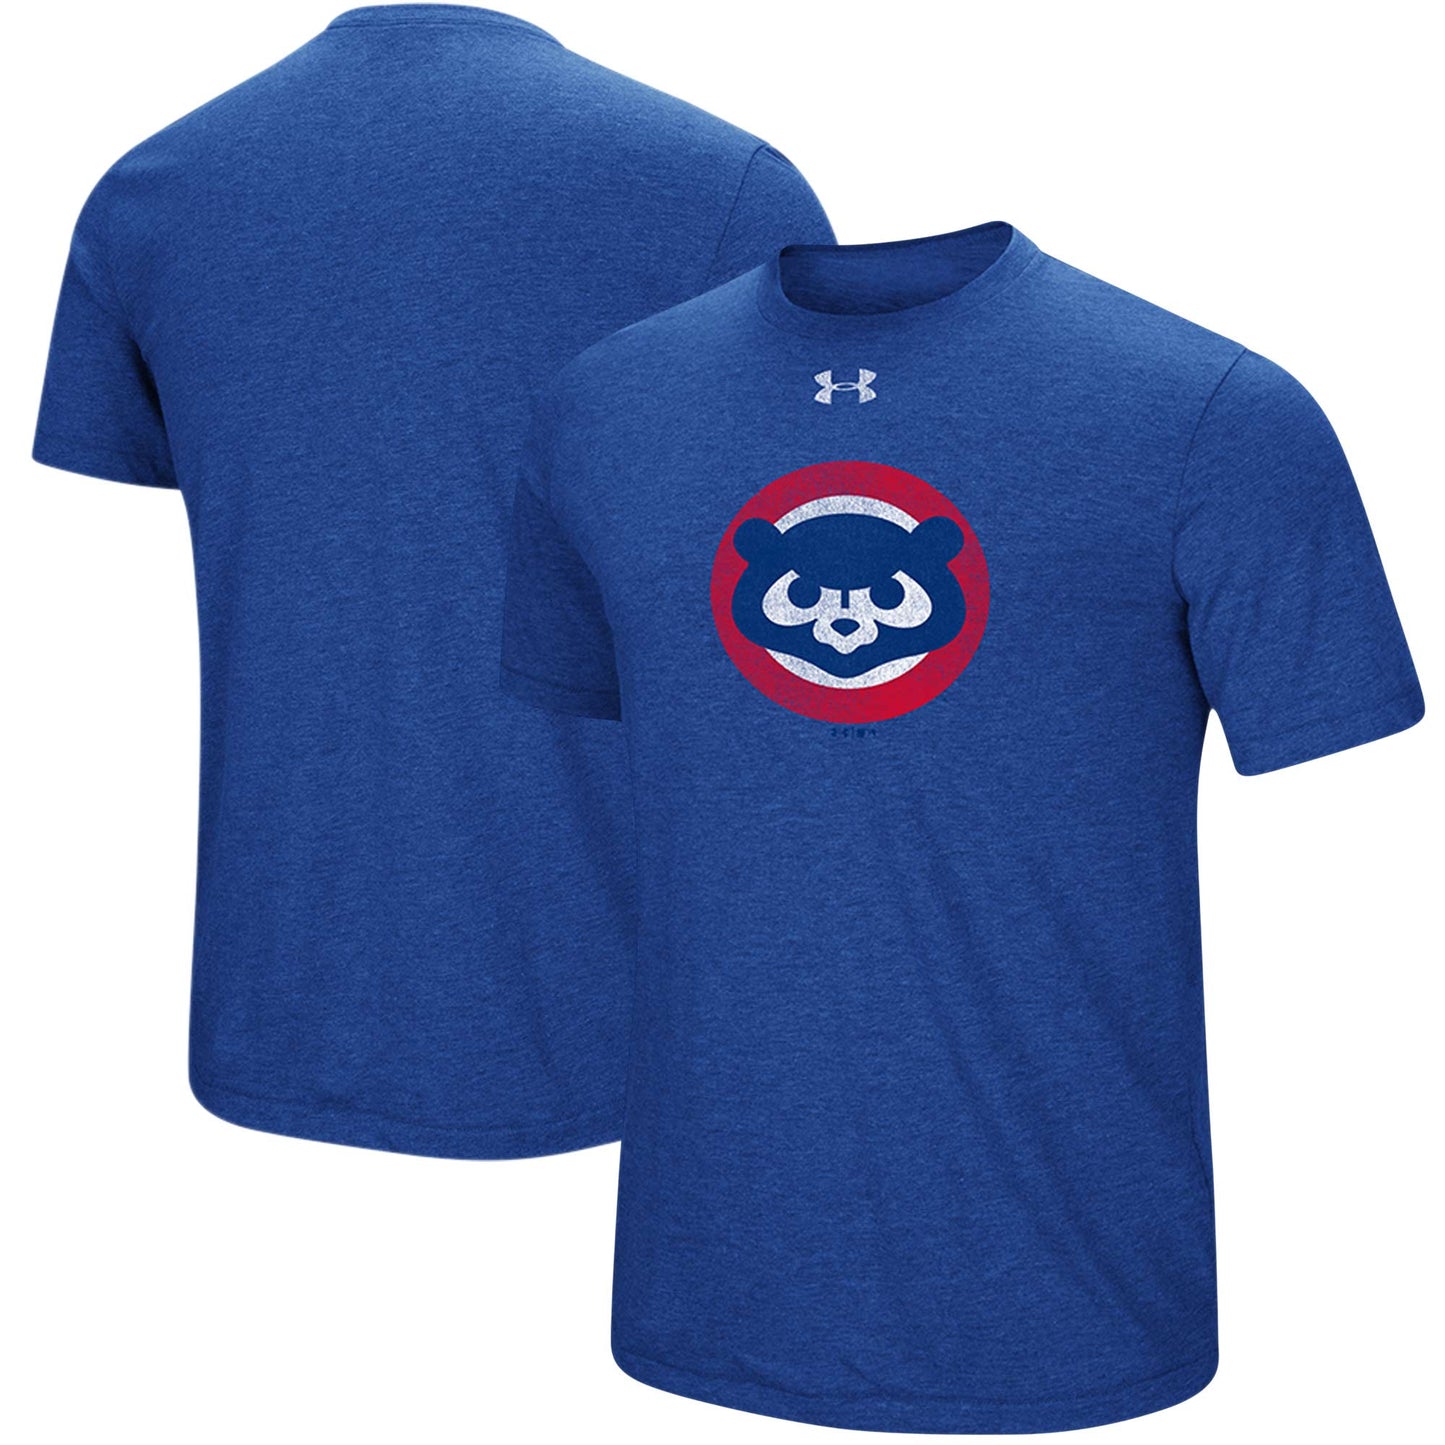 Men's Chicago Cubs Under Armour Heathered Royal Cooperstown Collection Mark Tri-Blend T-Shirt